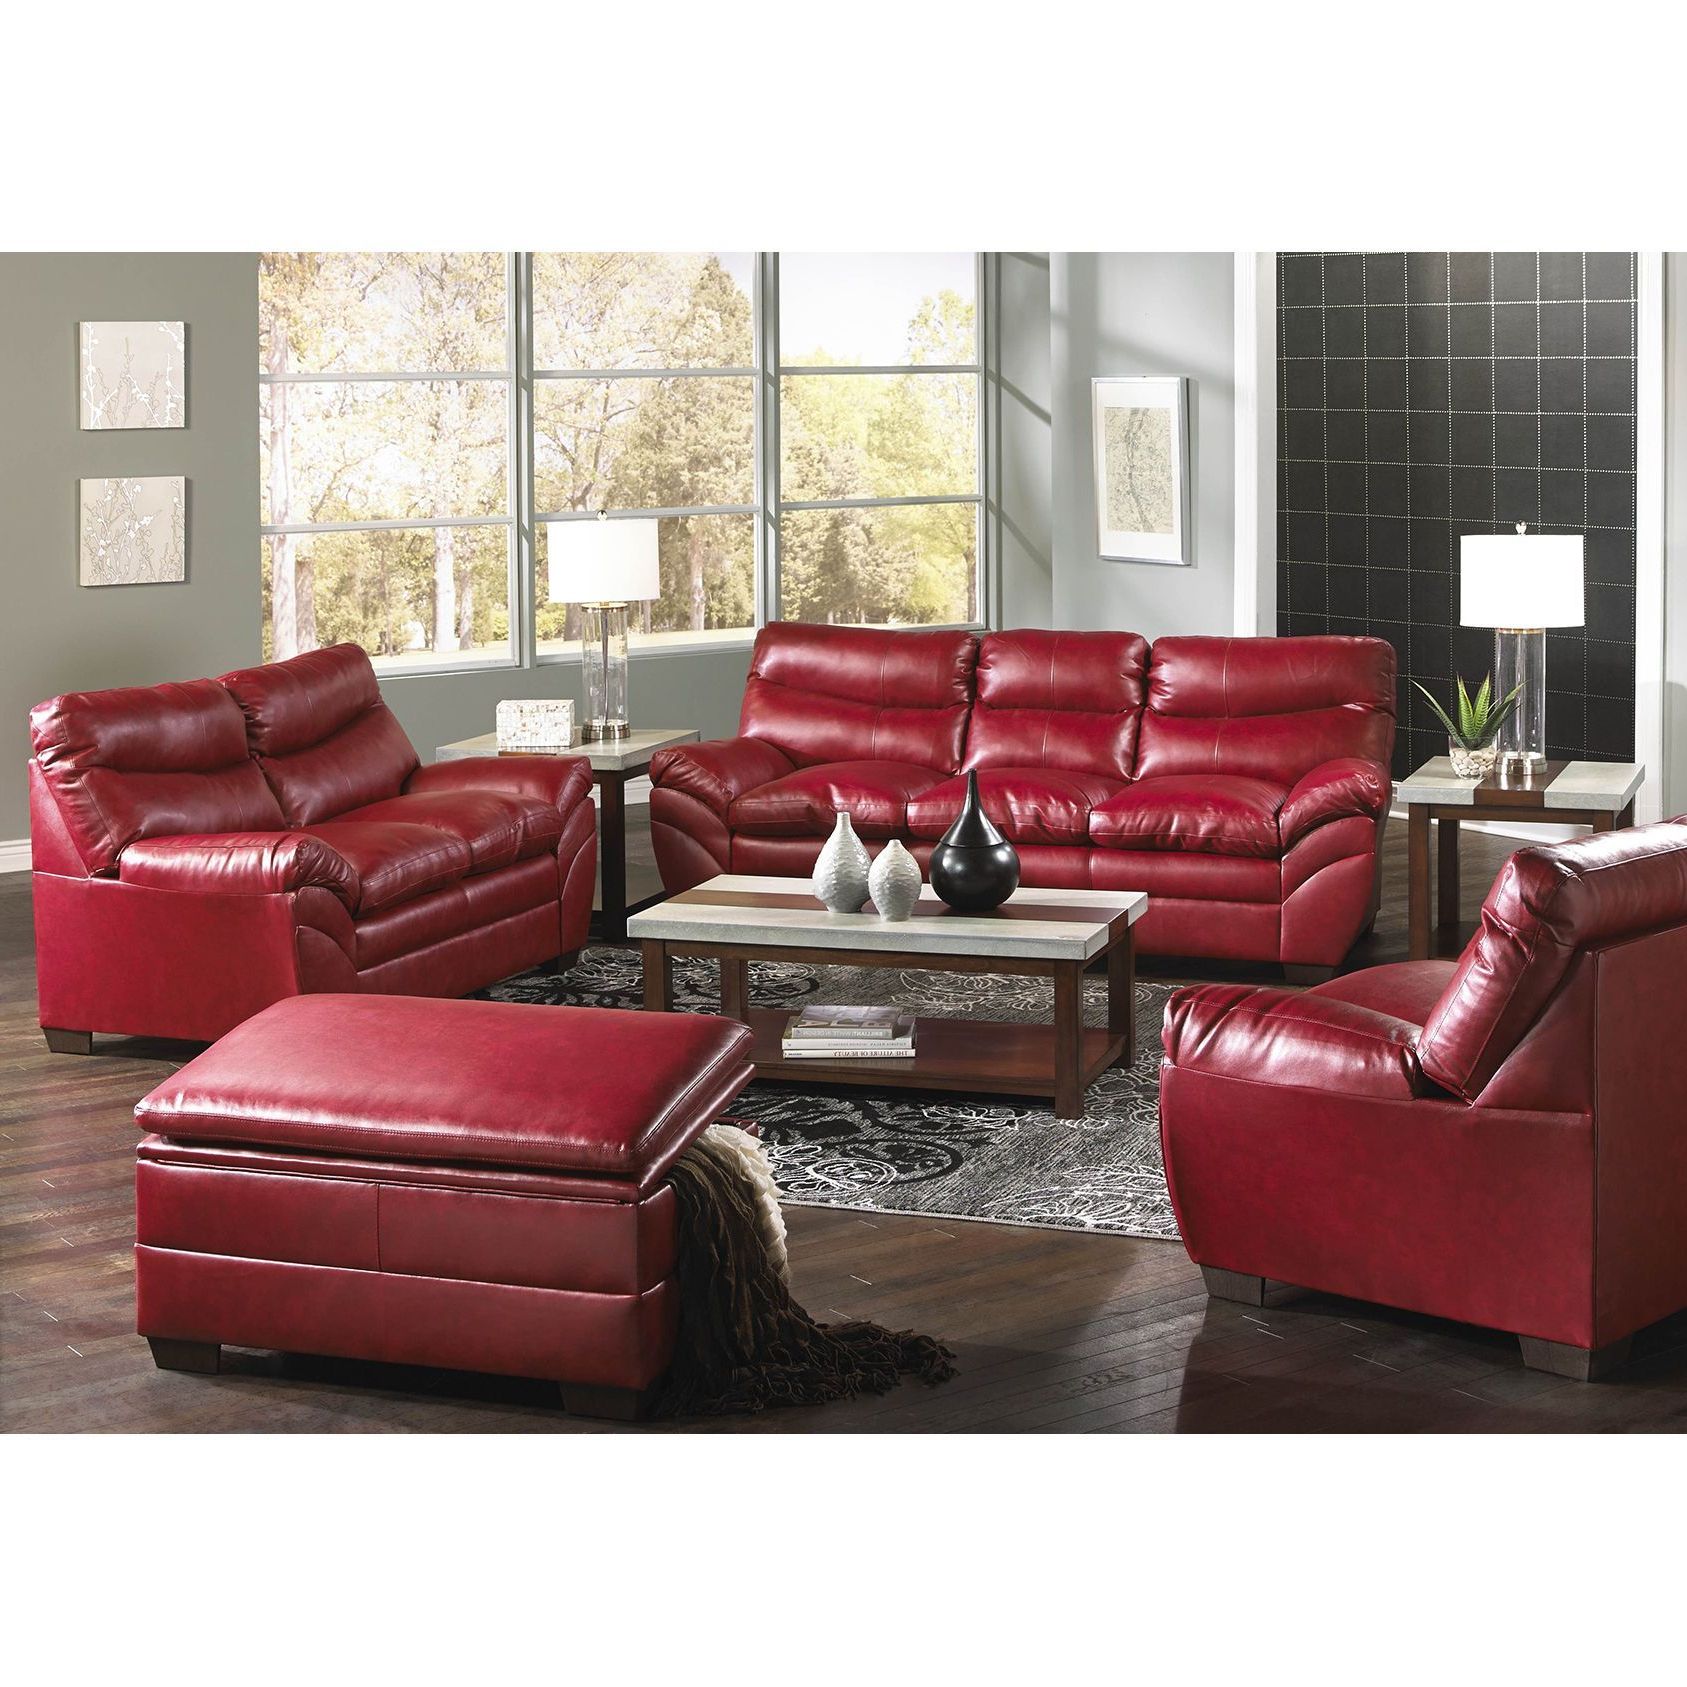 Most Recent Tenny Cognac 2 Piece Right Facing Chaise Sectionals With 2 Headrest Throughout Add Bold Elegance To Your Home With This Gorgeous Love Seat (View 17 of 20)